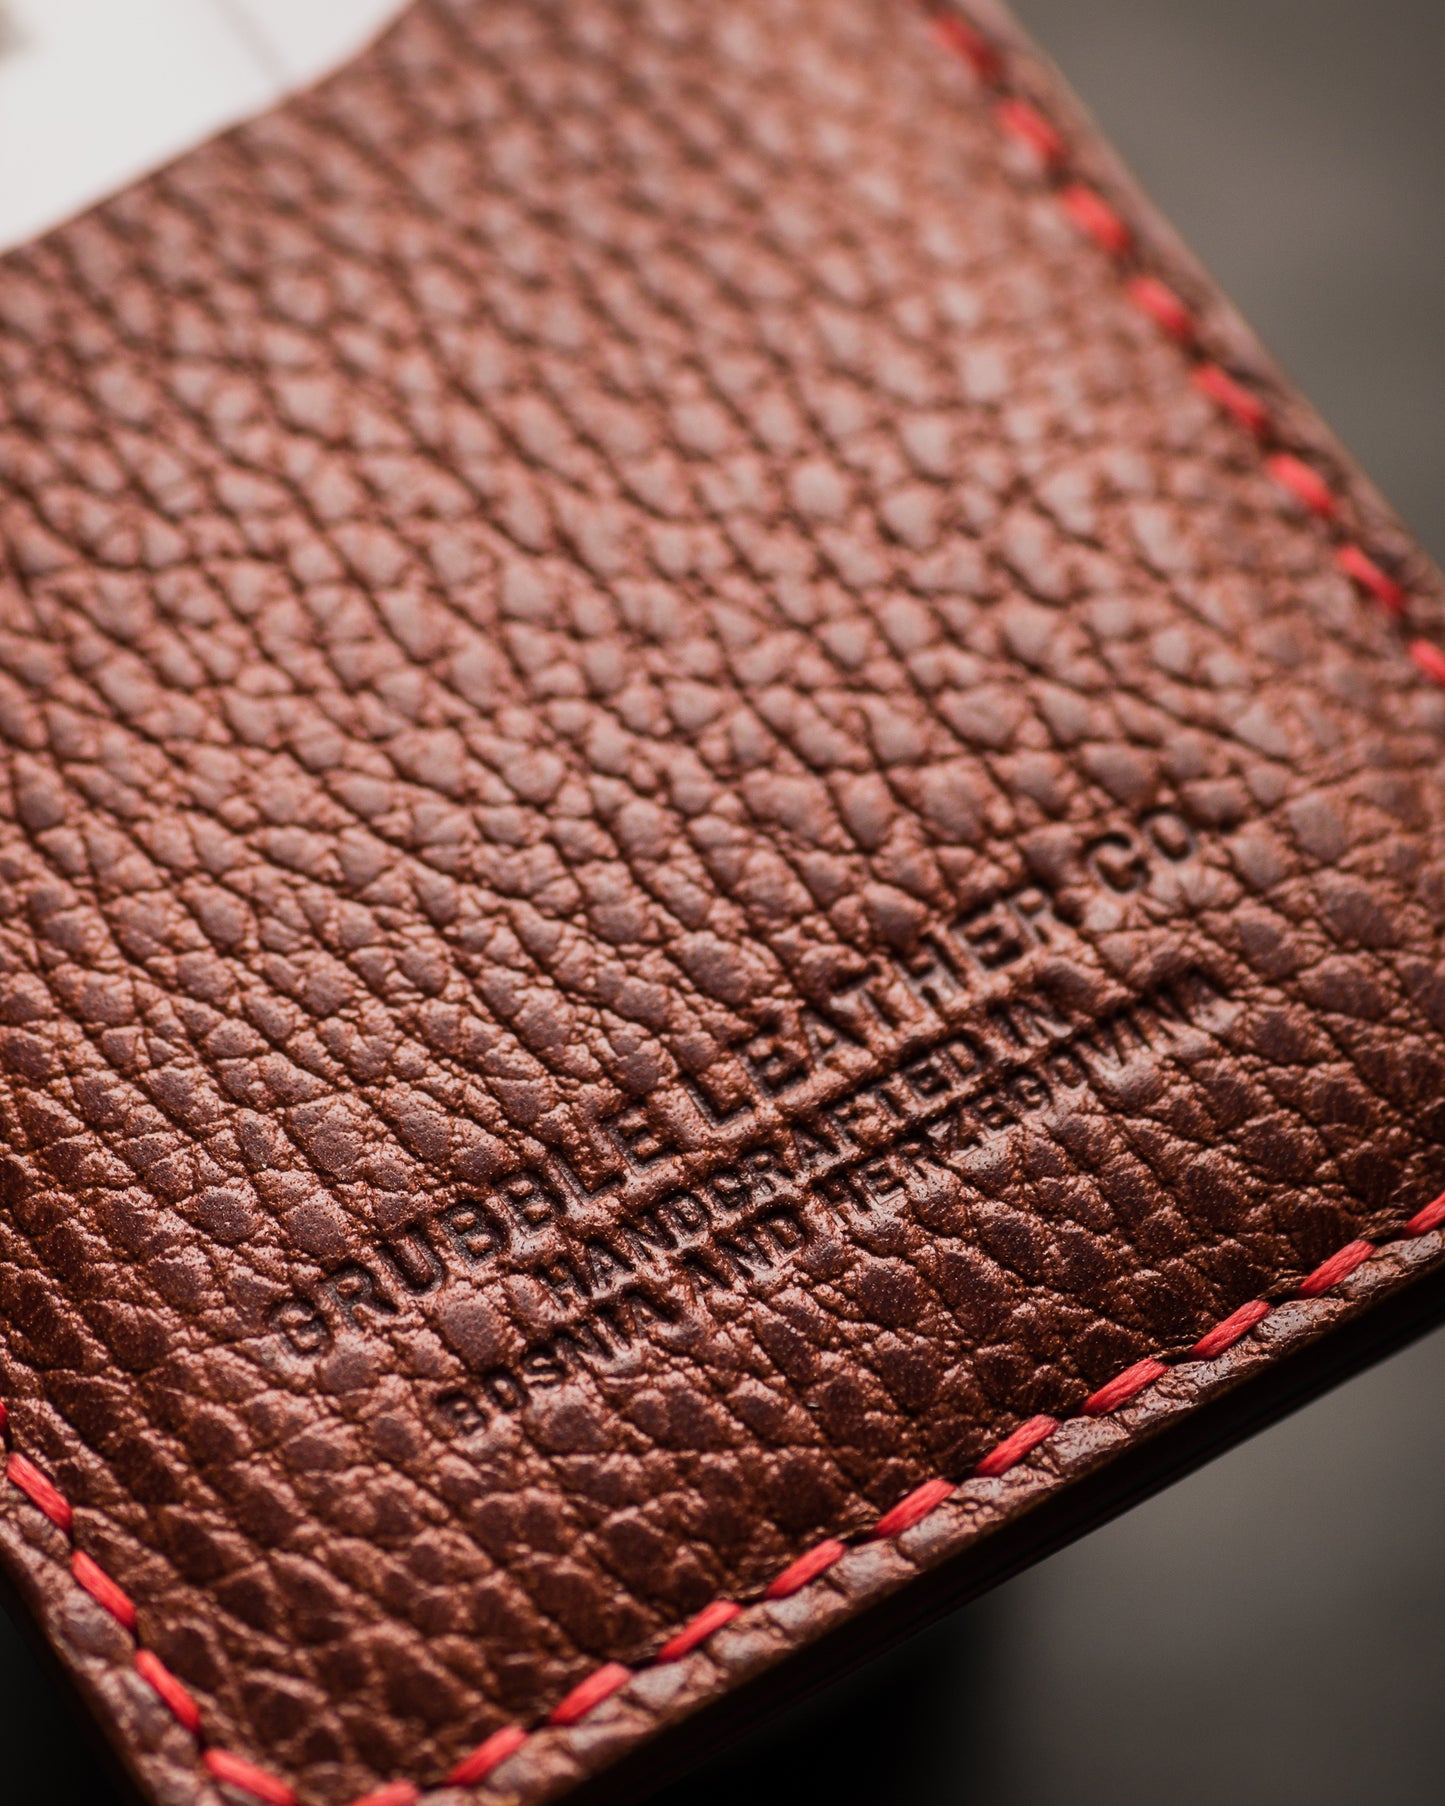 Leather Card-Holder - Brown/Red by Grubble